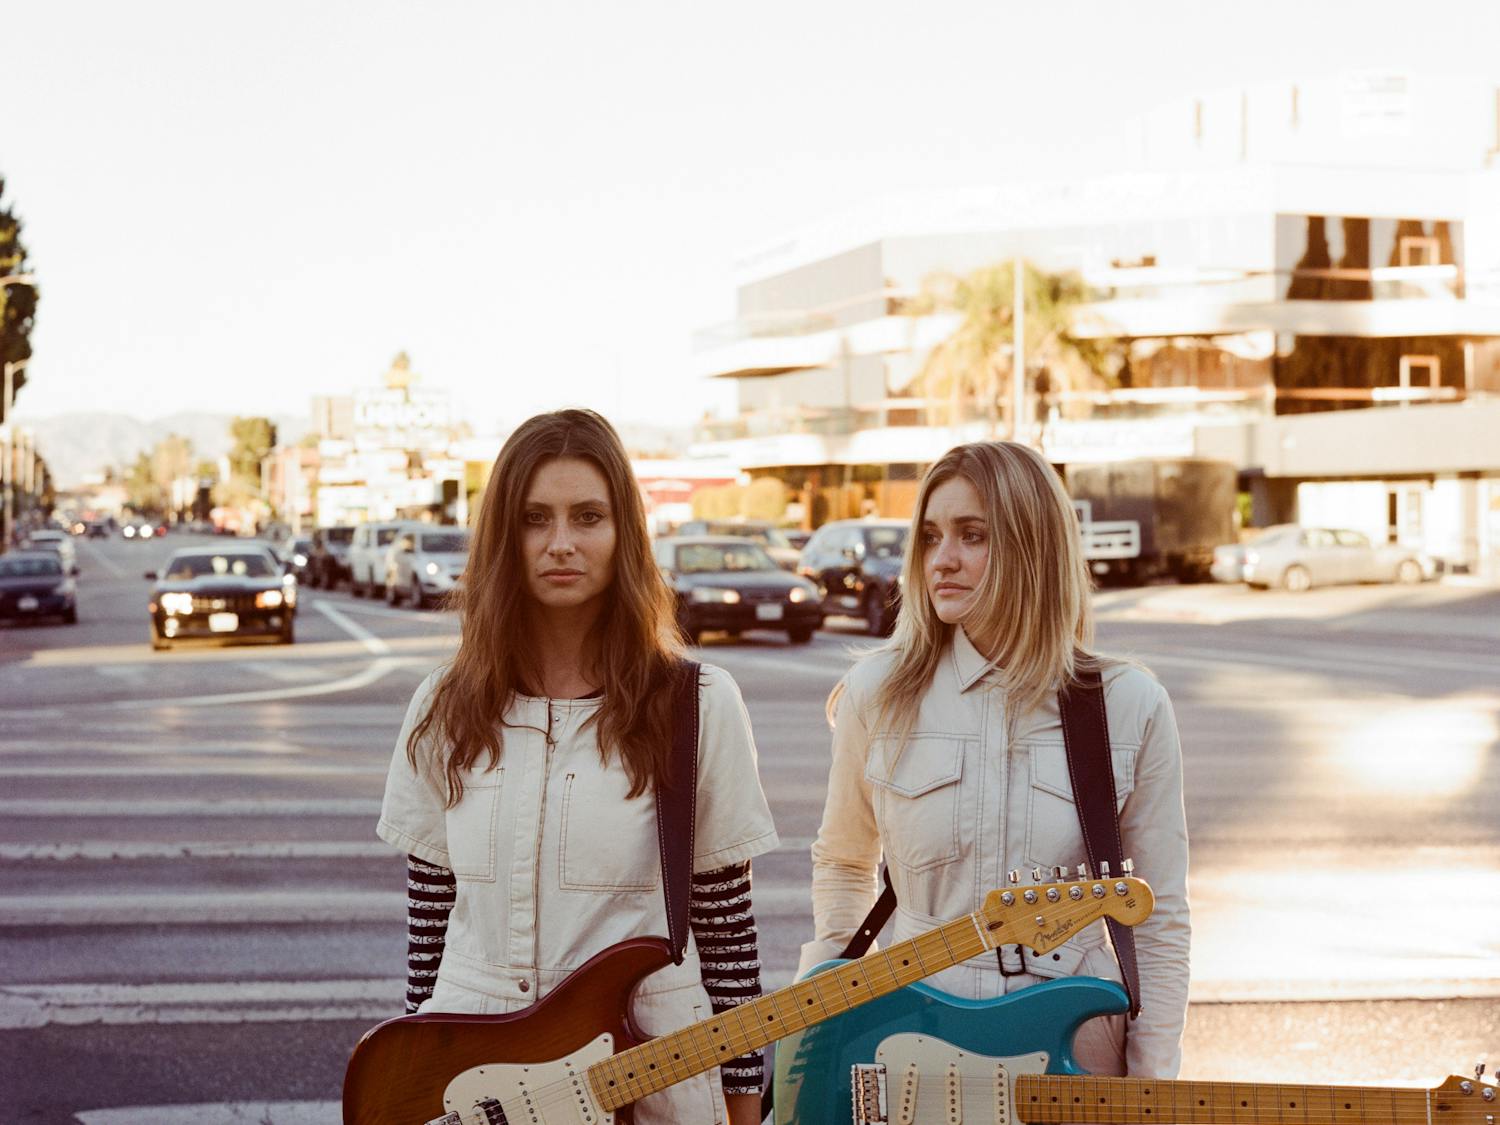 &quot;Listen!!!&quot; will be featured on Aly &amp; AJ&#x27;s upcoming album, to be released in spring.